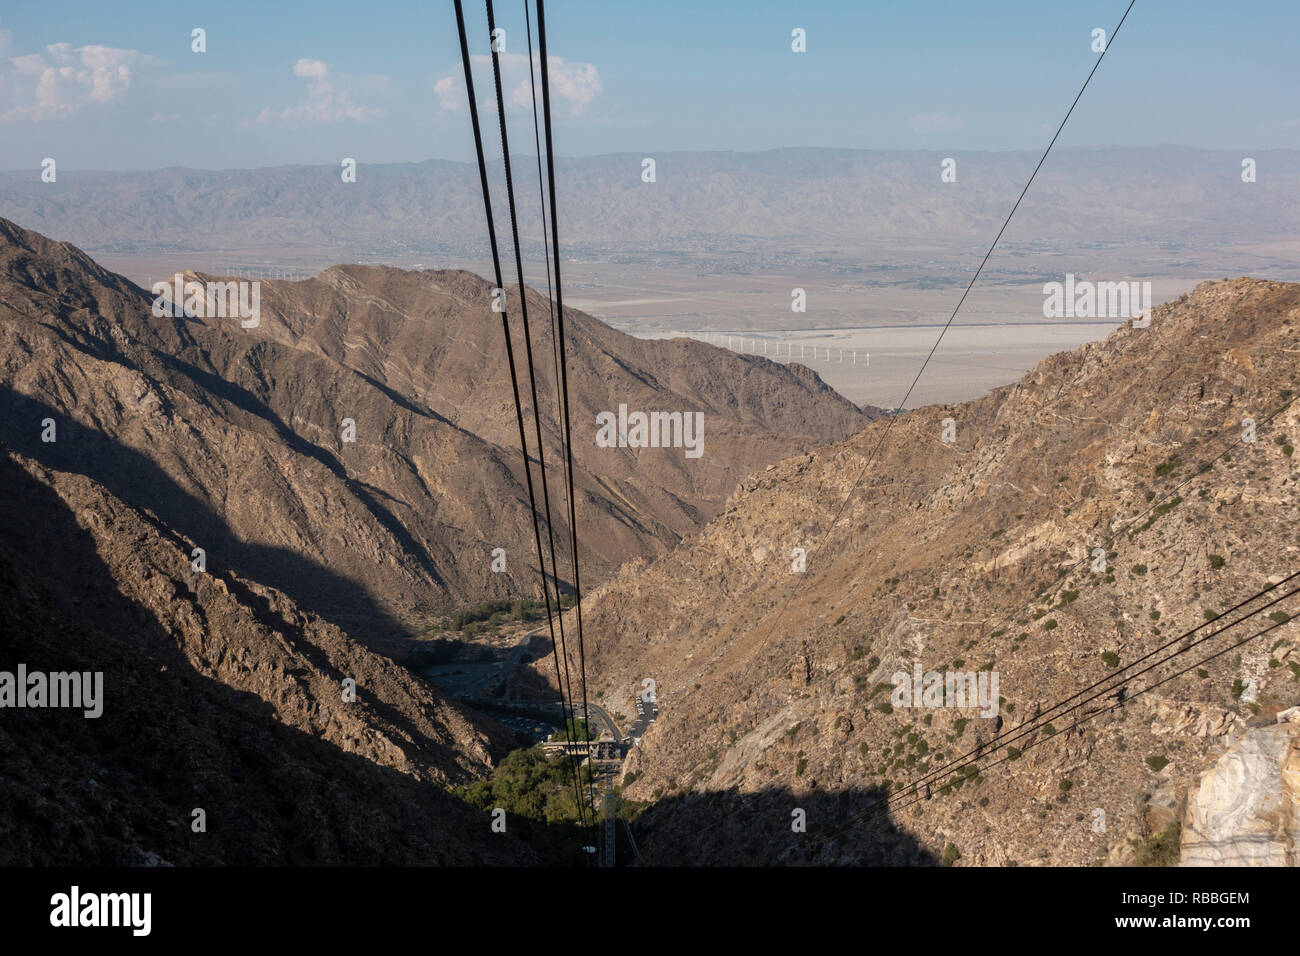 Stunning view of Palm Springs from the Palm Springs Aerial Tramway car, California, United States. Stock Photo